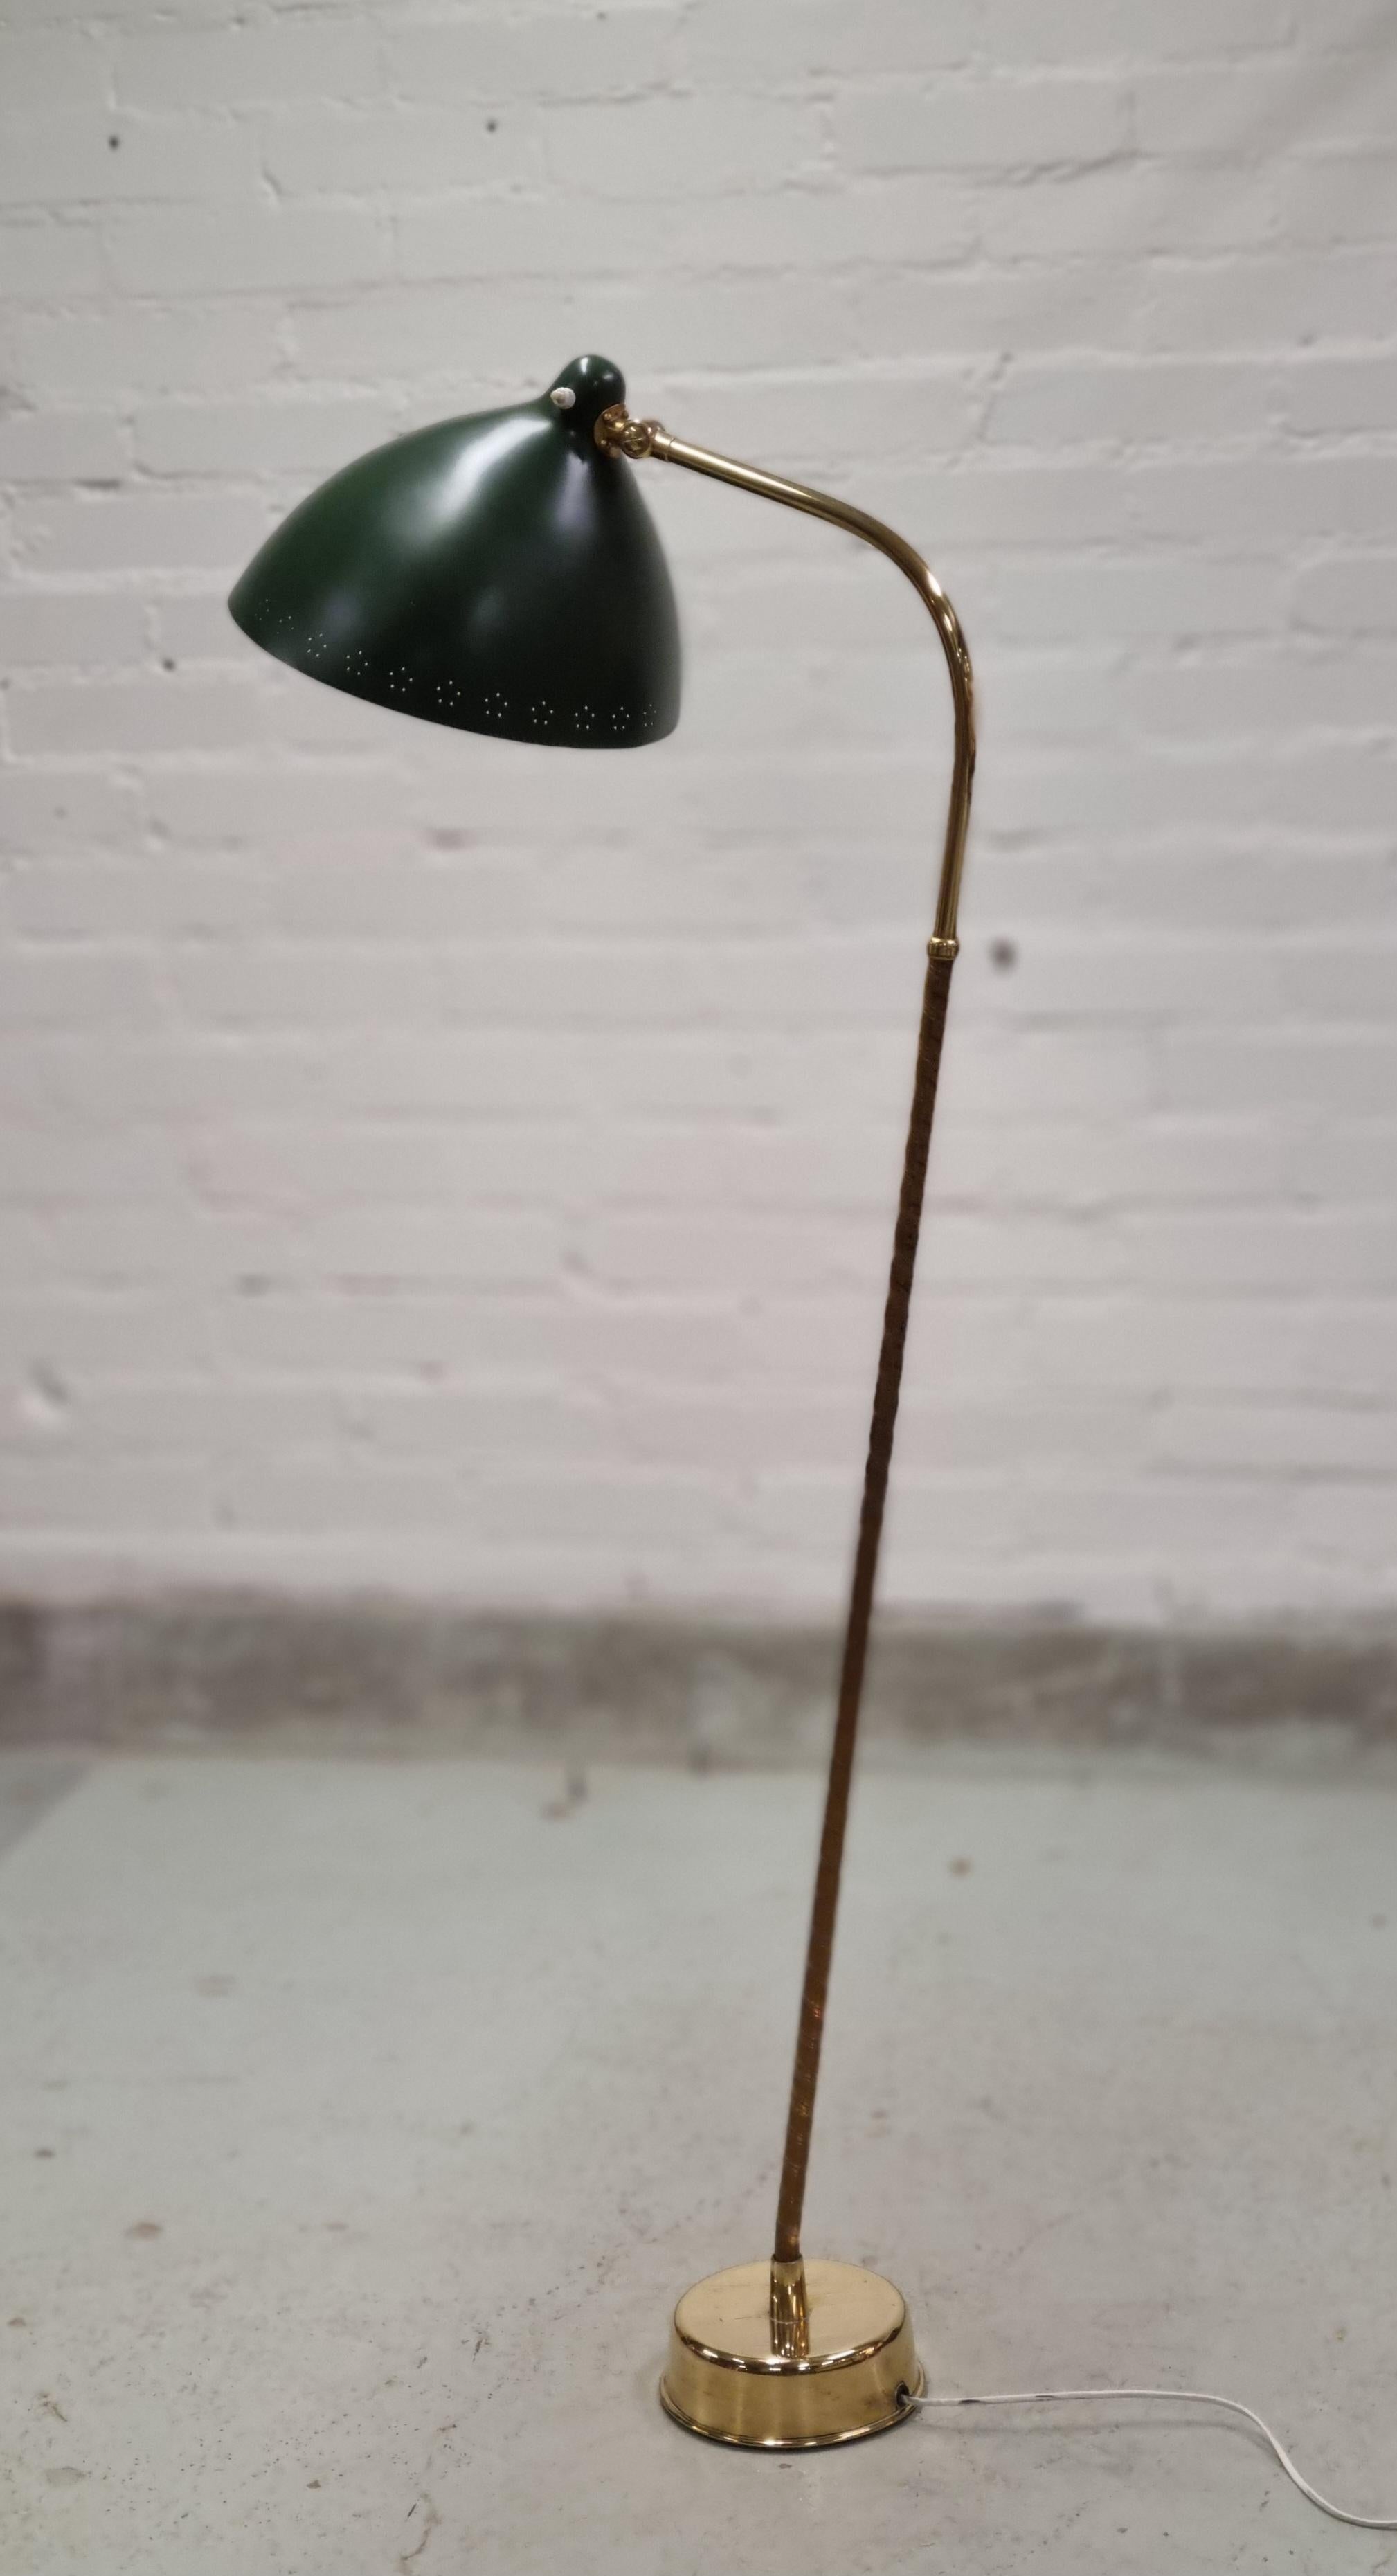 A beautiful and original floor lamp from the 1950s, with a new forest green look. Designed by Lisa-Johansson pape and manufactured by Orno. In complete original condition with a beautiful patina on the stem and brass parts. The shade has been